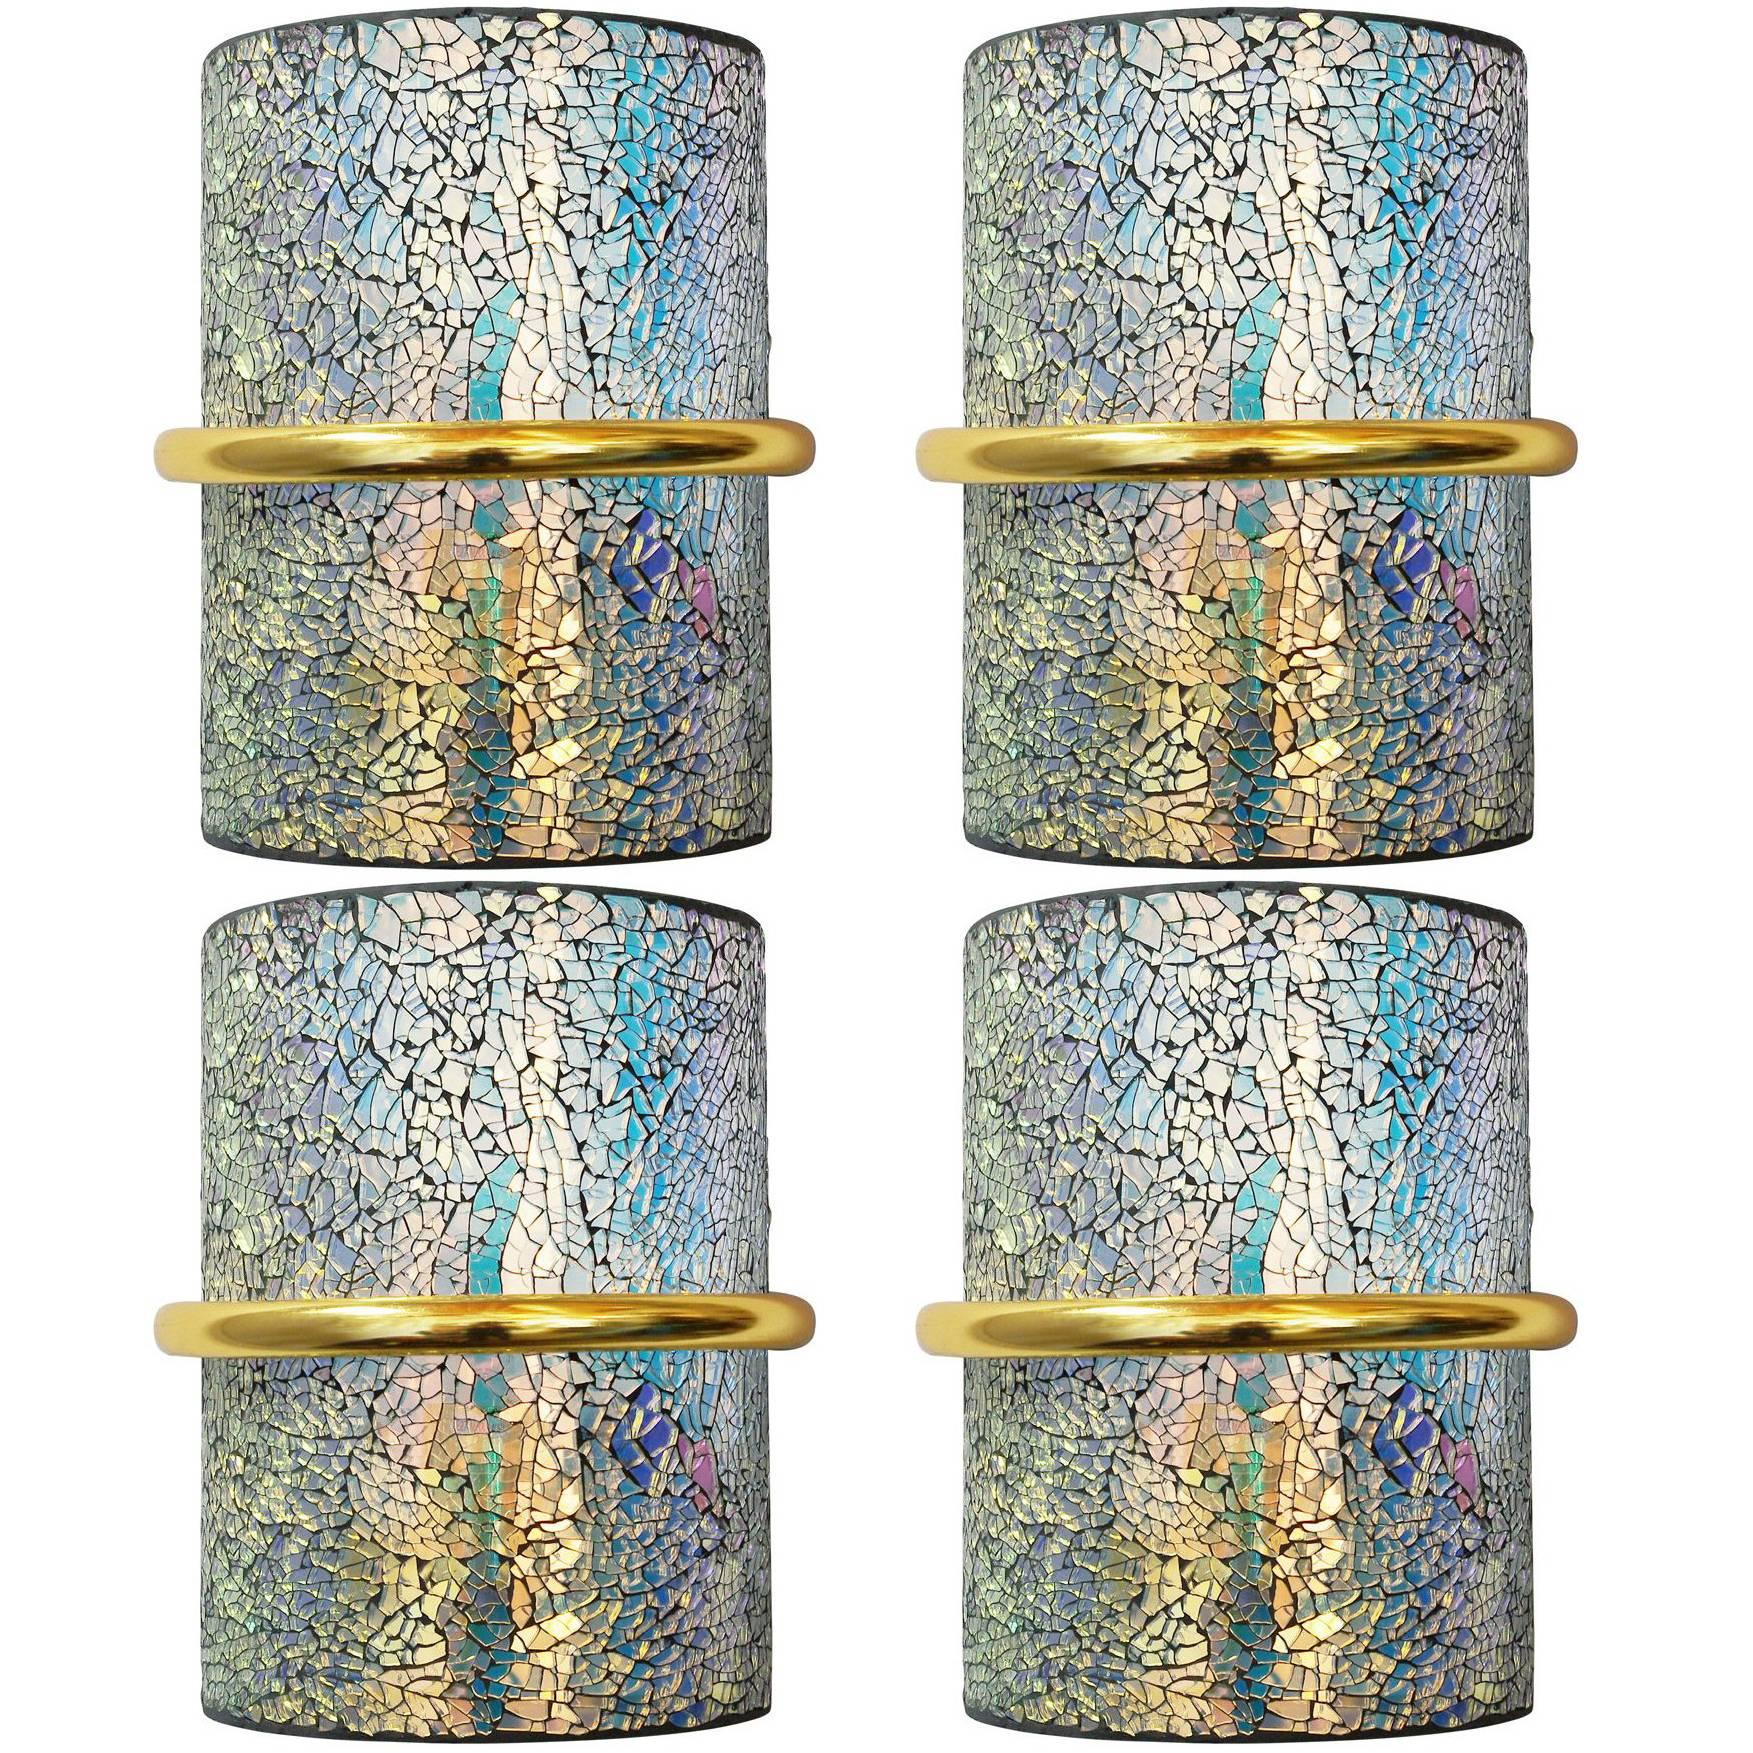 Hand-Crafted Twelve Crackled Sconces FINAL CLEARANCE SALE